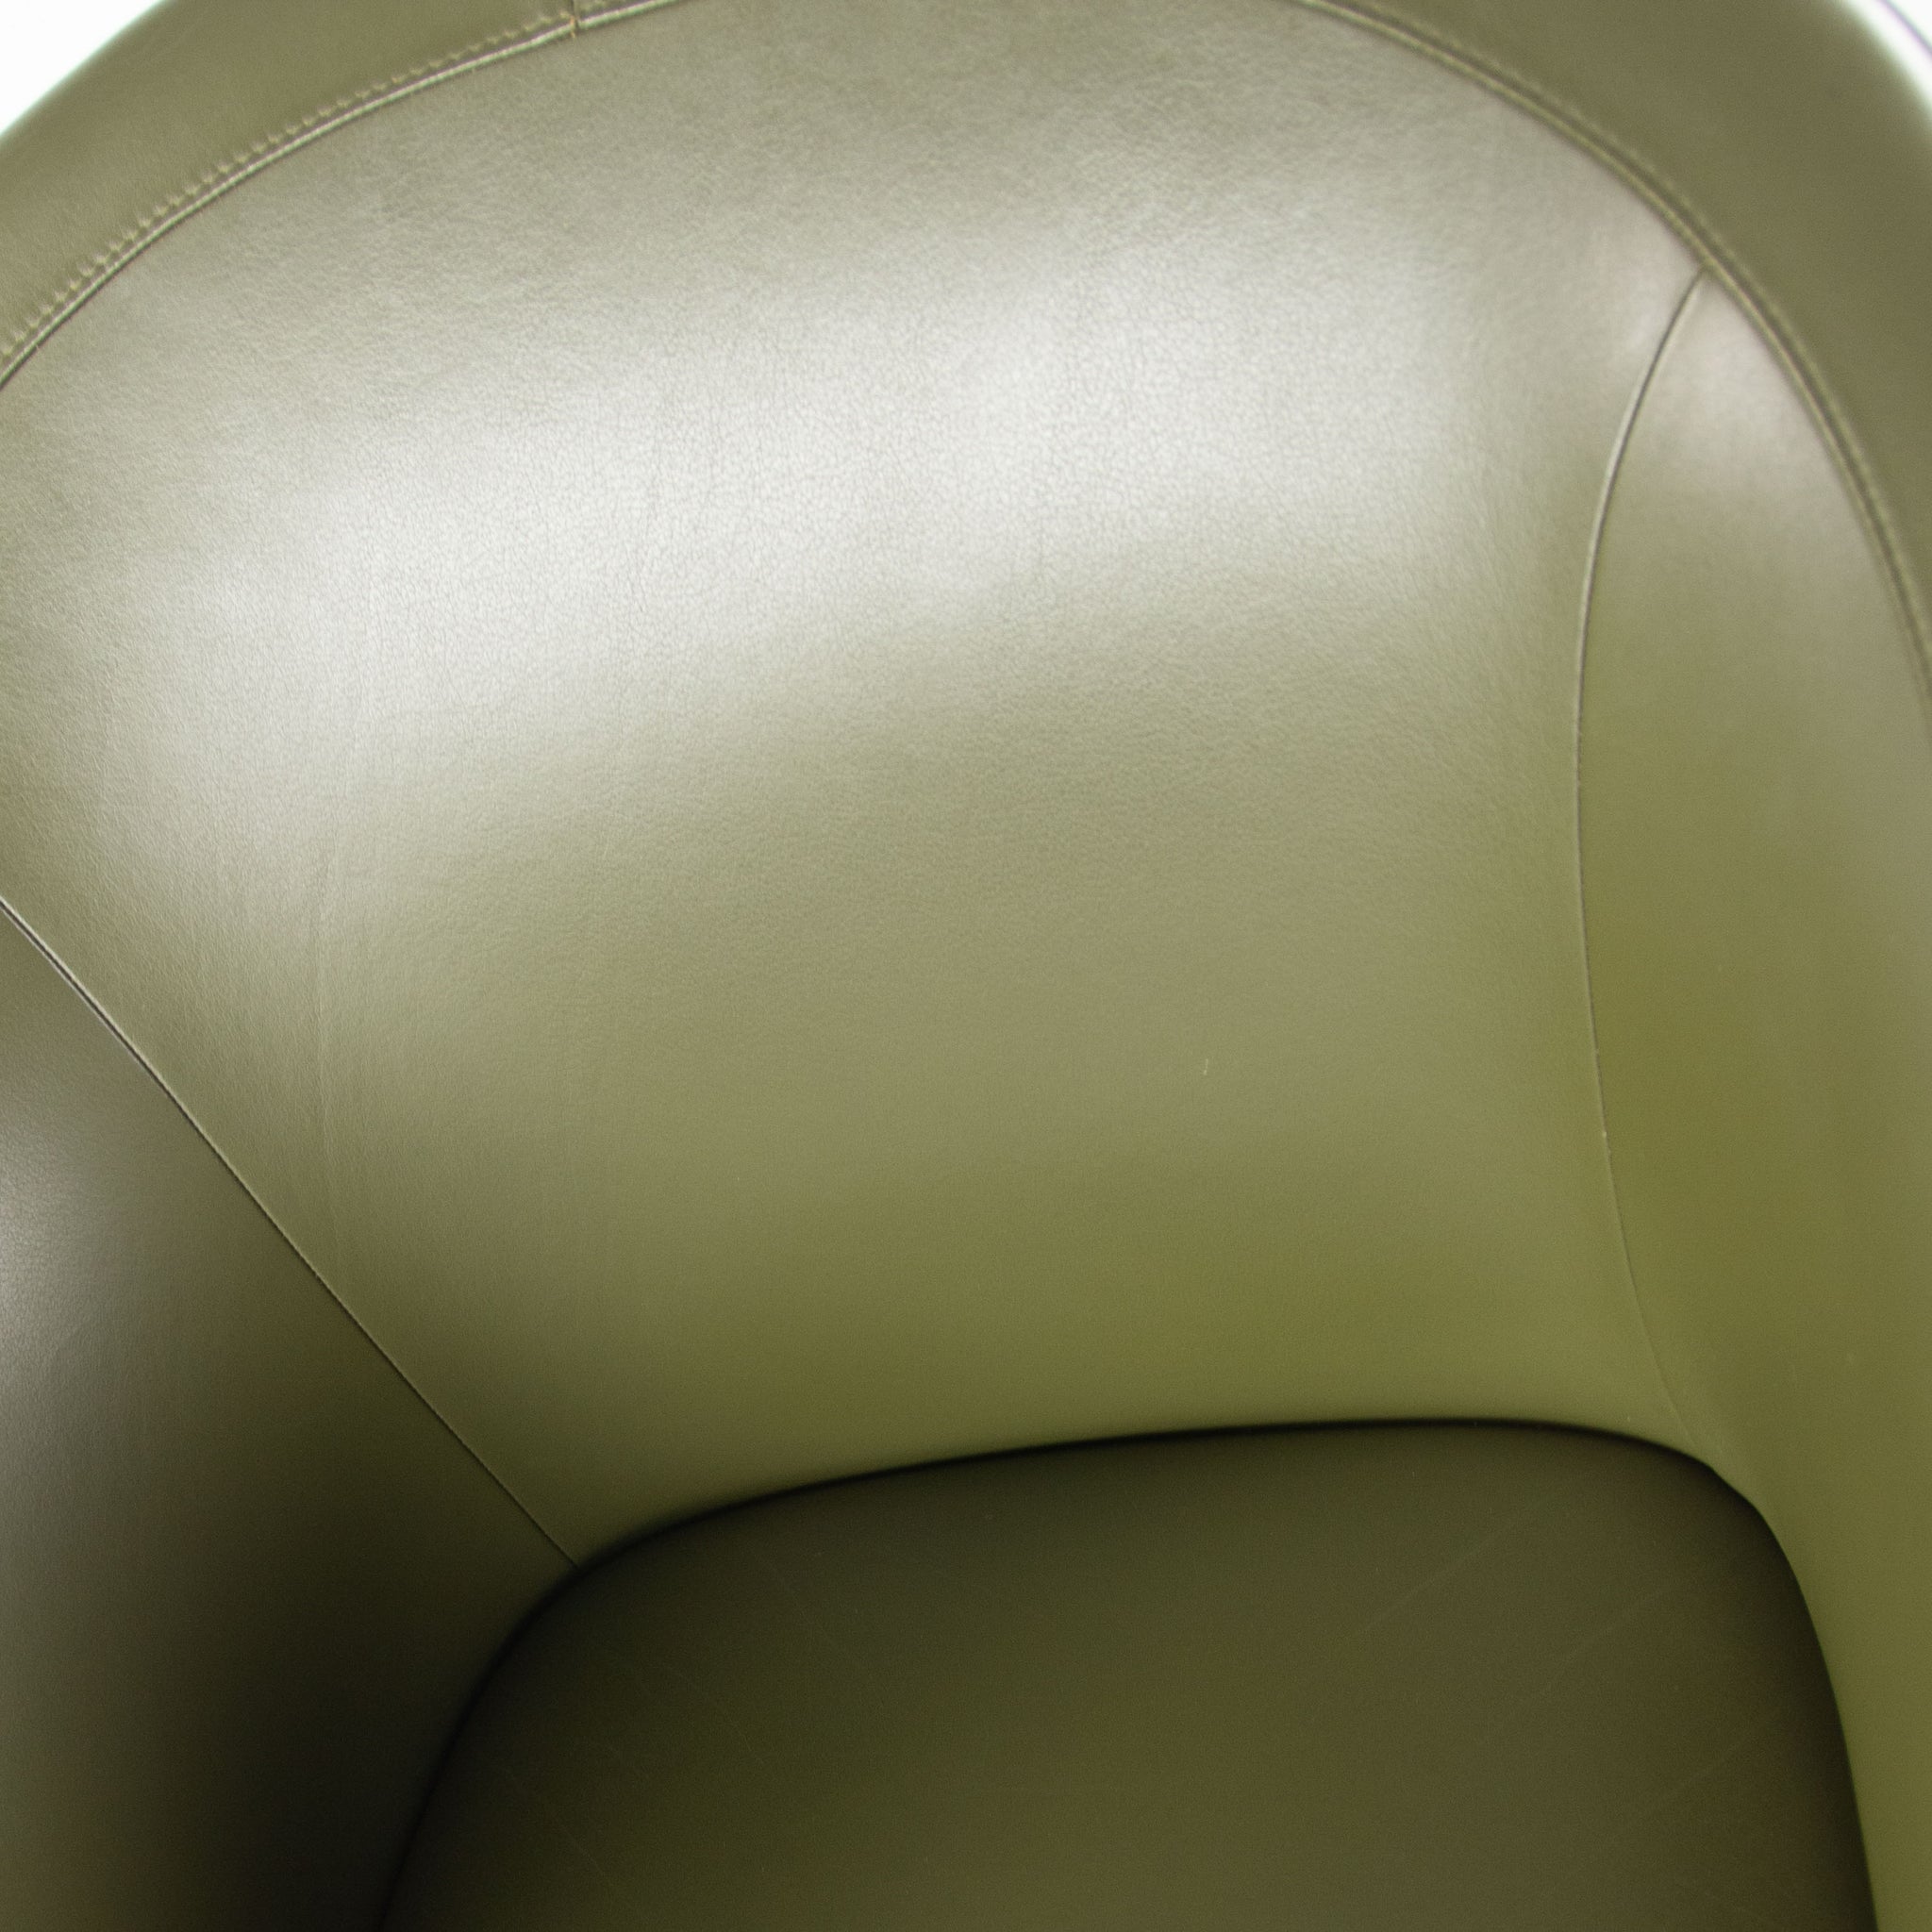 Poltrona Frau Green Leather Luca Scacchetti Sinan Office Desk Chair Multiples Available